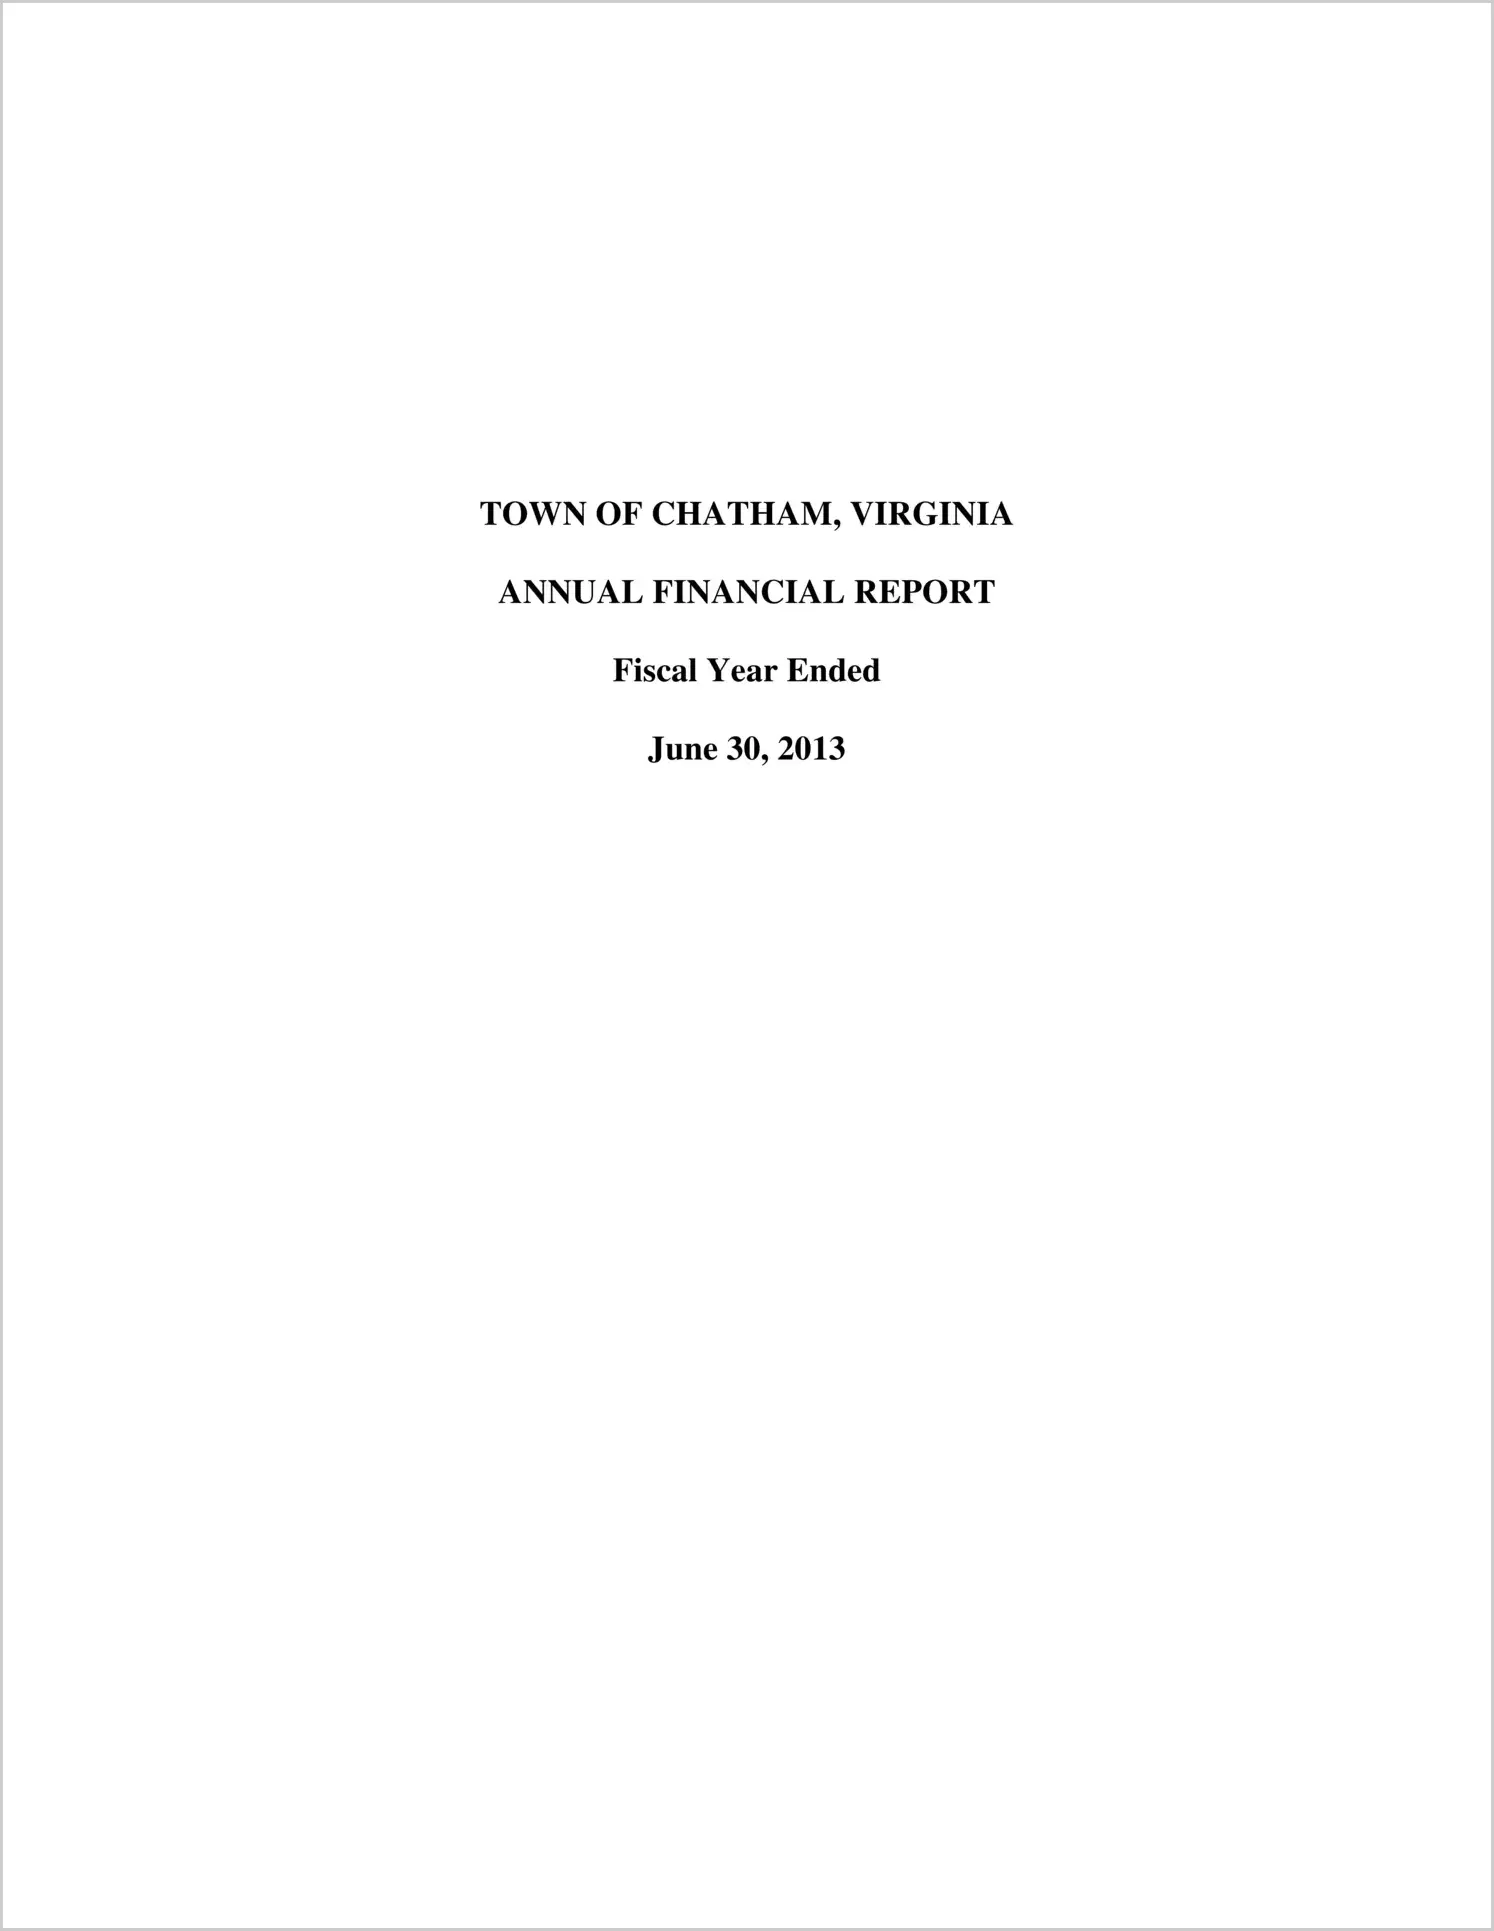 2013 Annual Financial Report for Town of Chatham